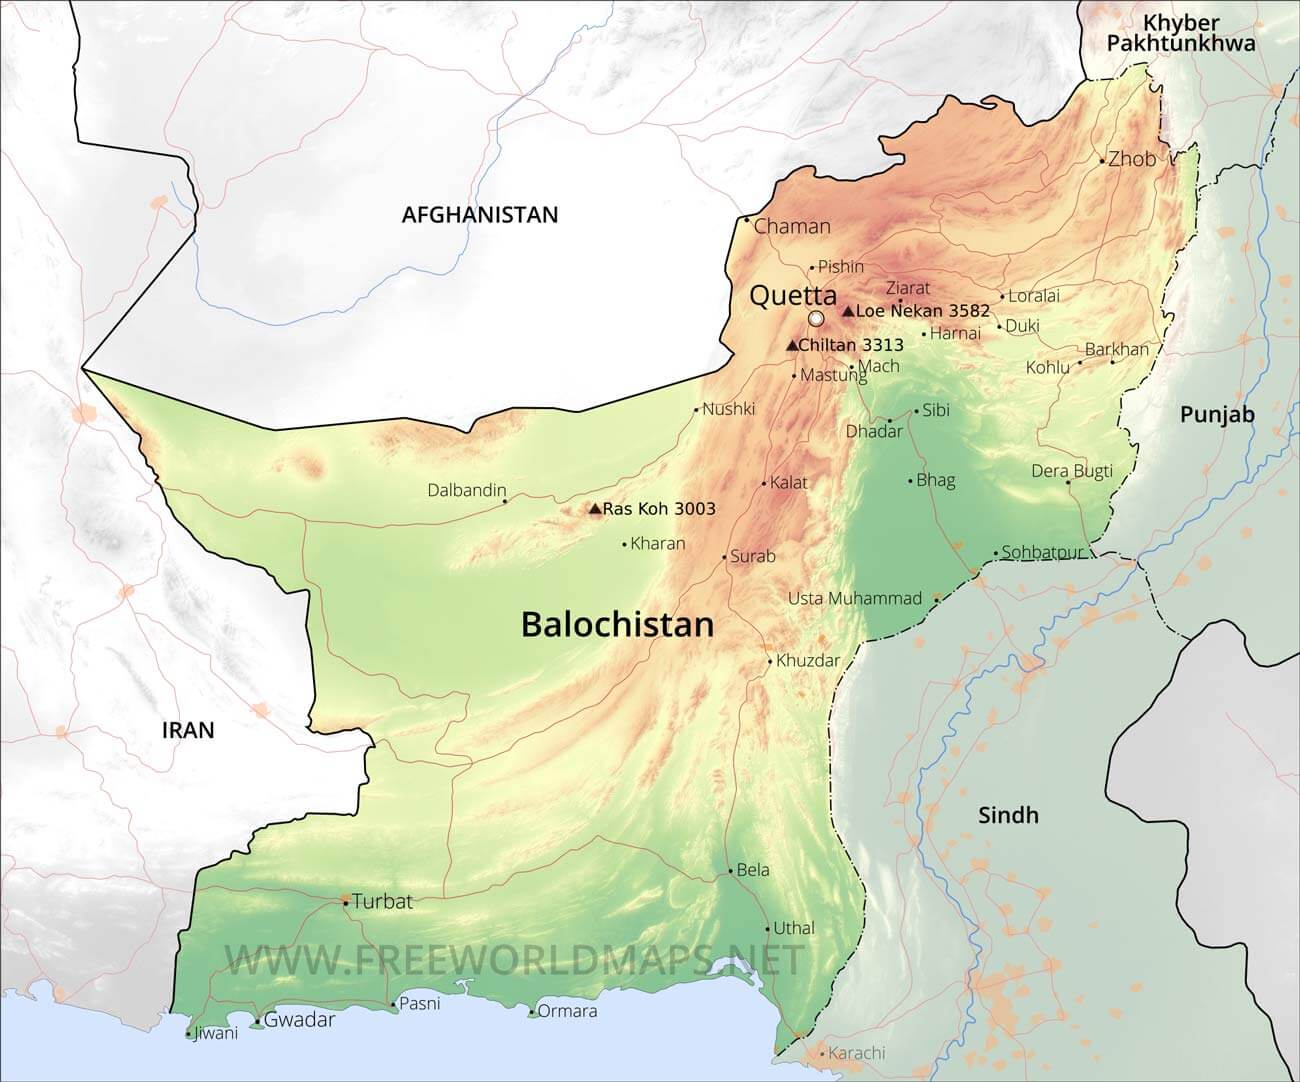 Balochistan is the largest and poorest of Pakistan's 4 provinces, bordering Afghanistan to the north and Iran to the west (source: Freeworld maps)